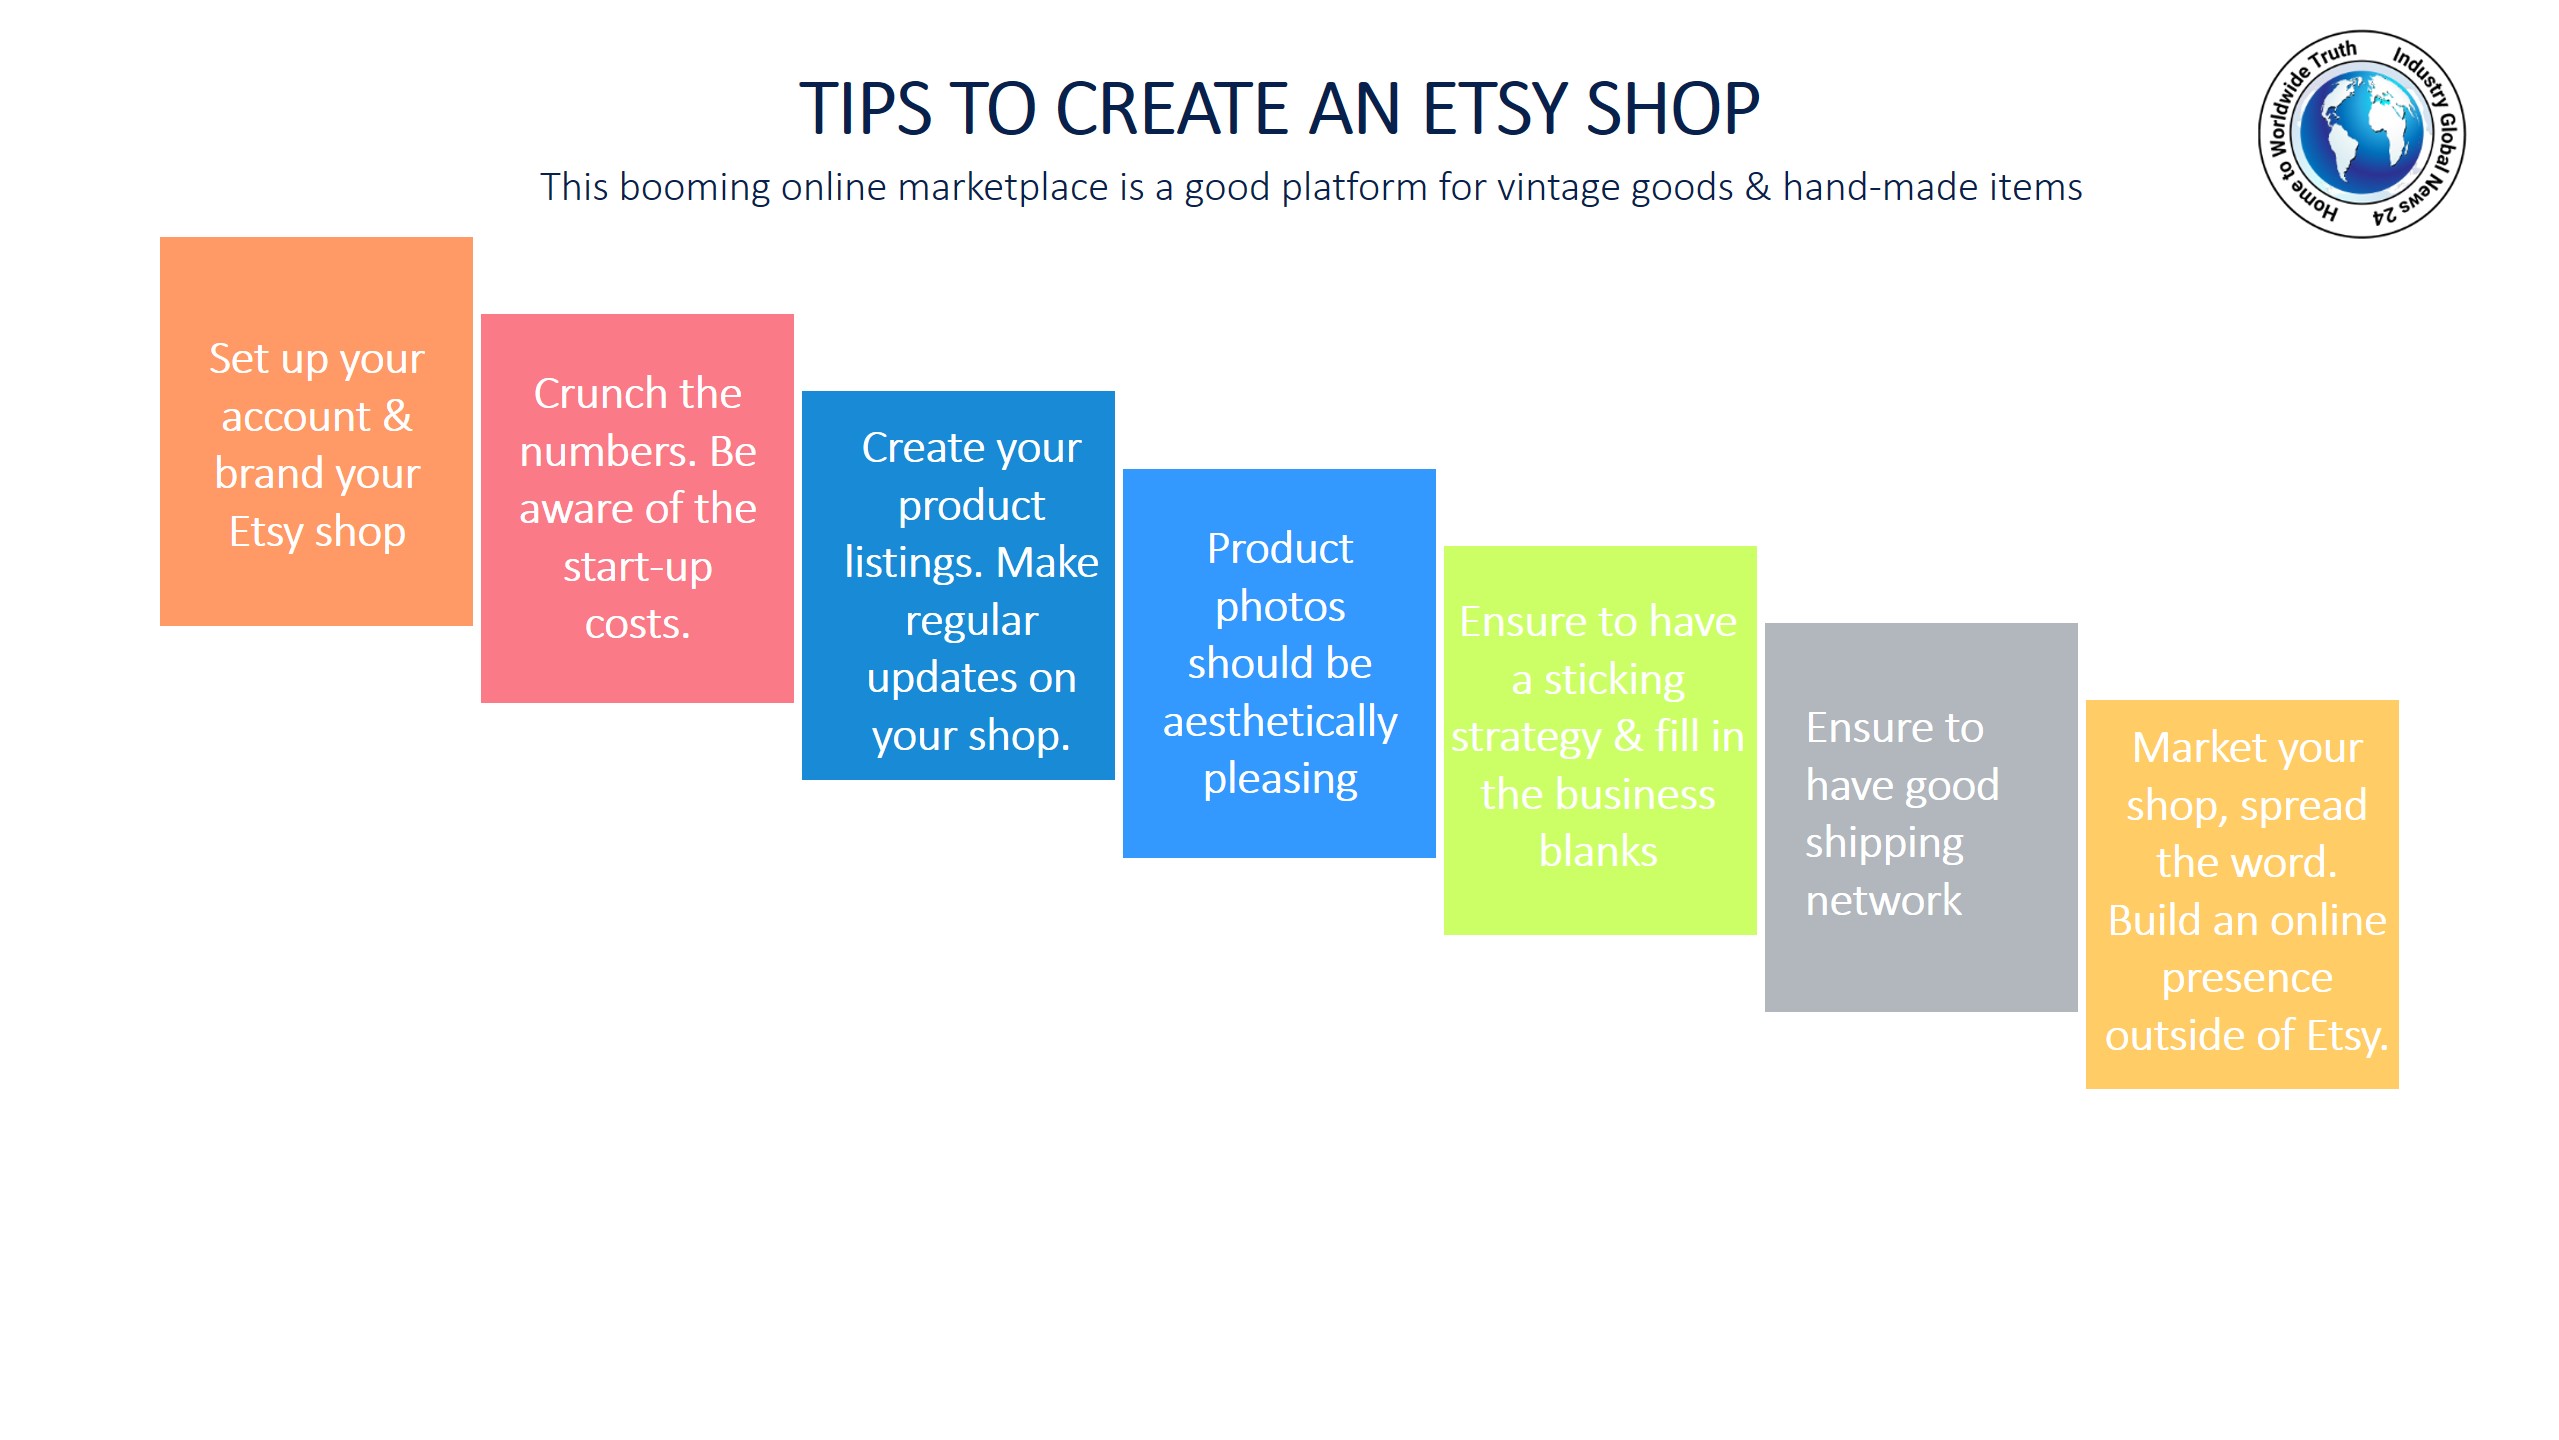 Tips to create an Etsy shop